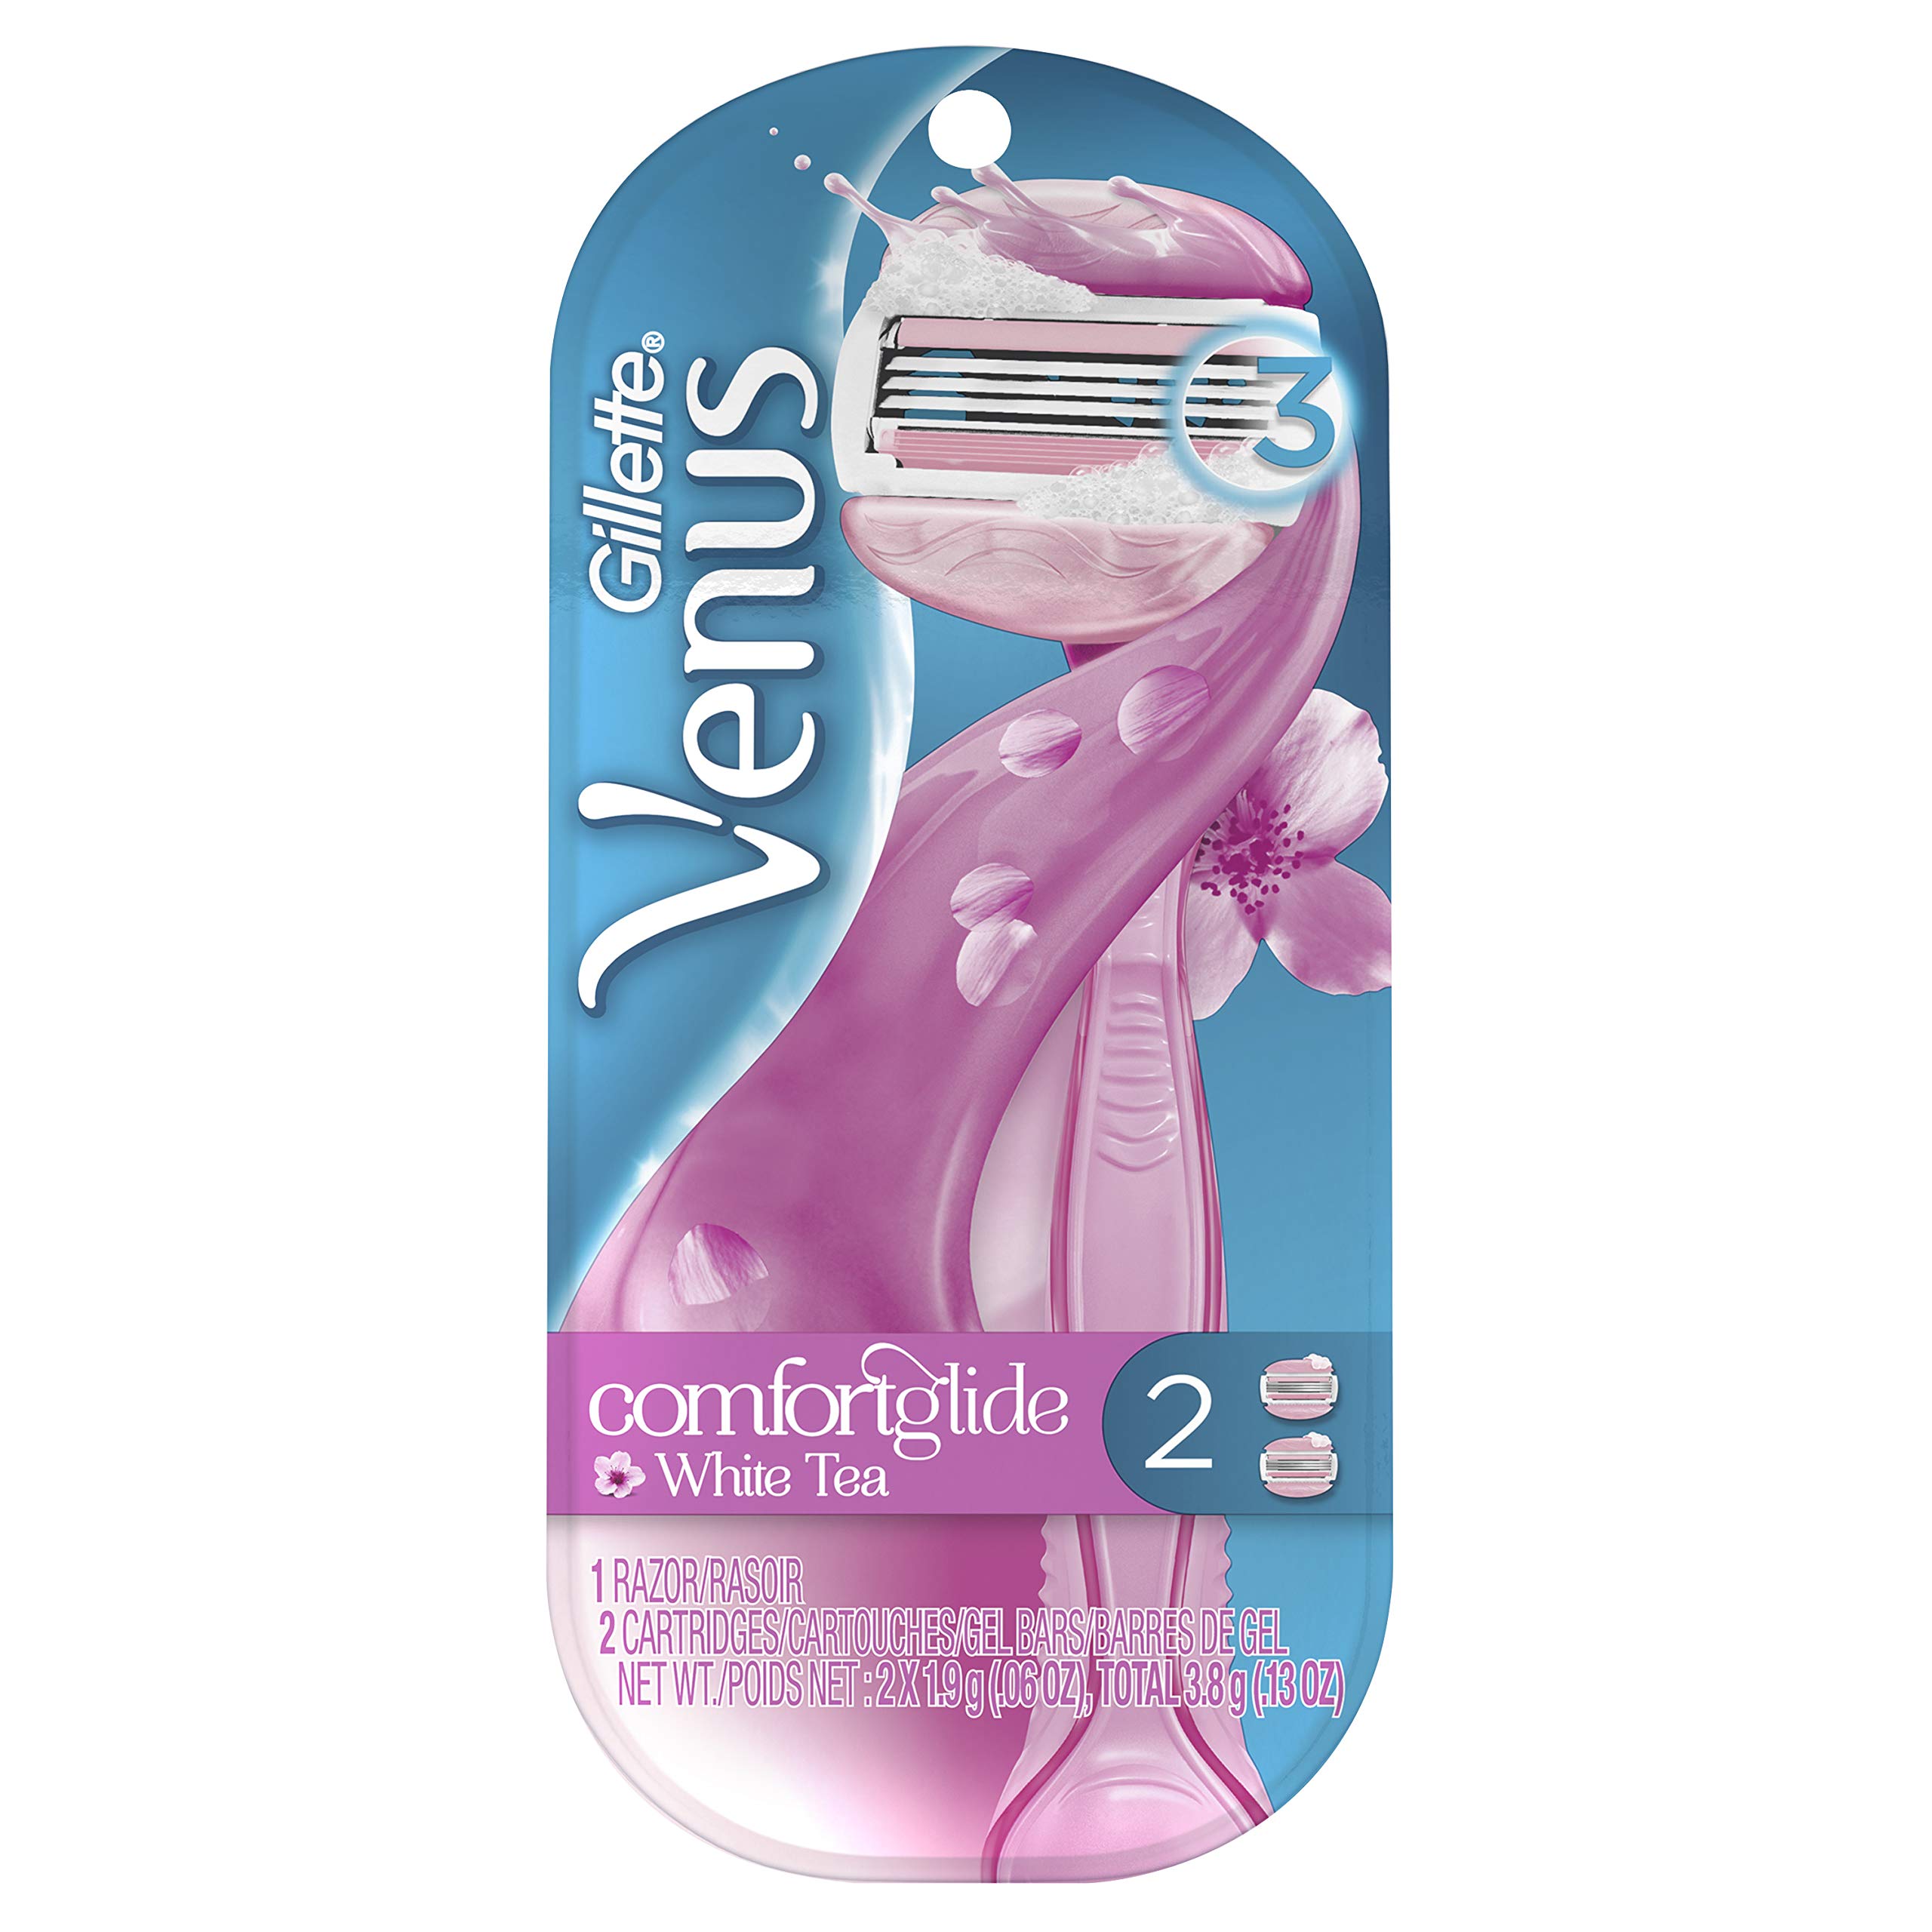 razor for pubic hair removal